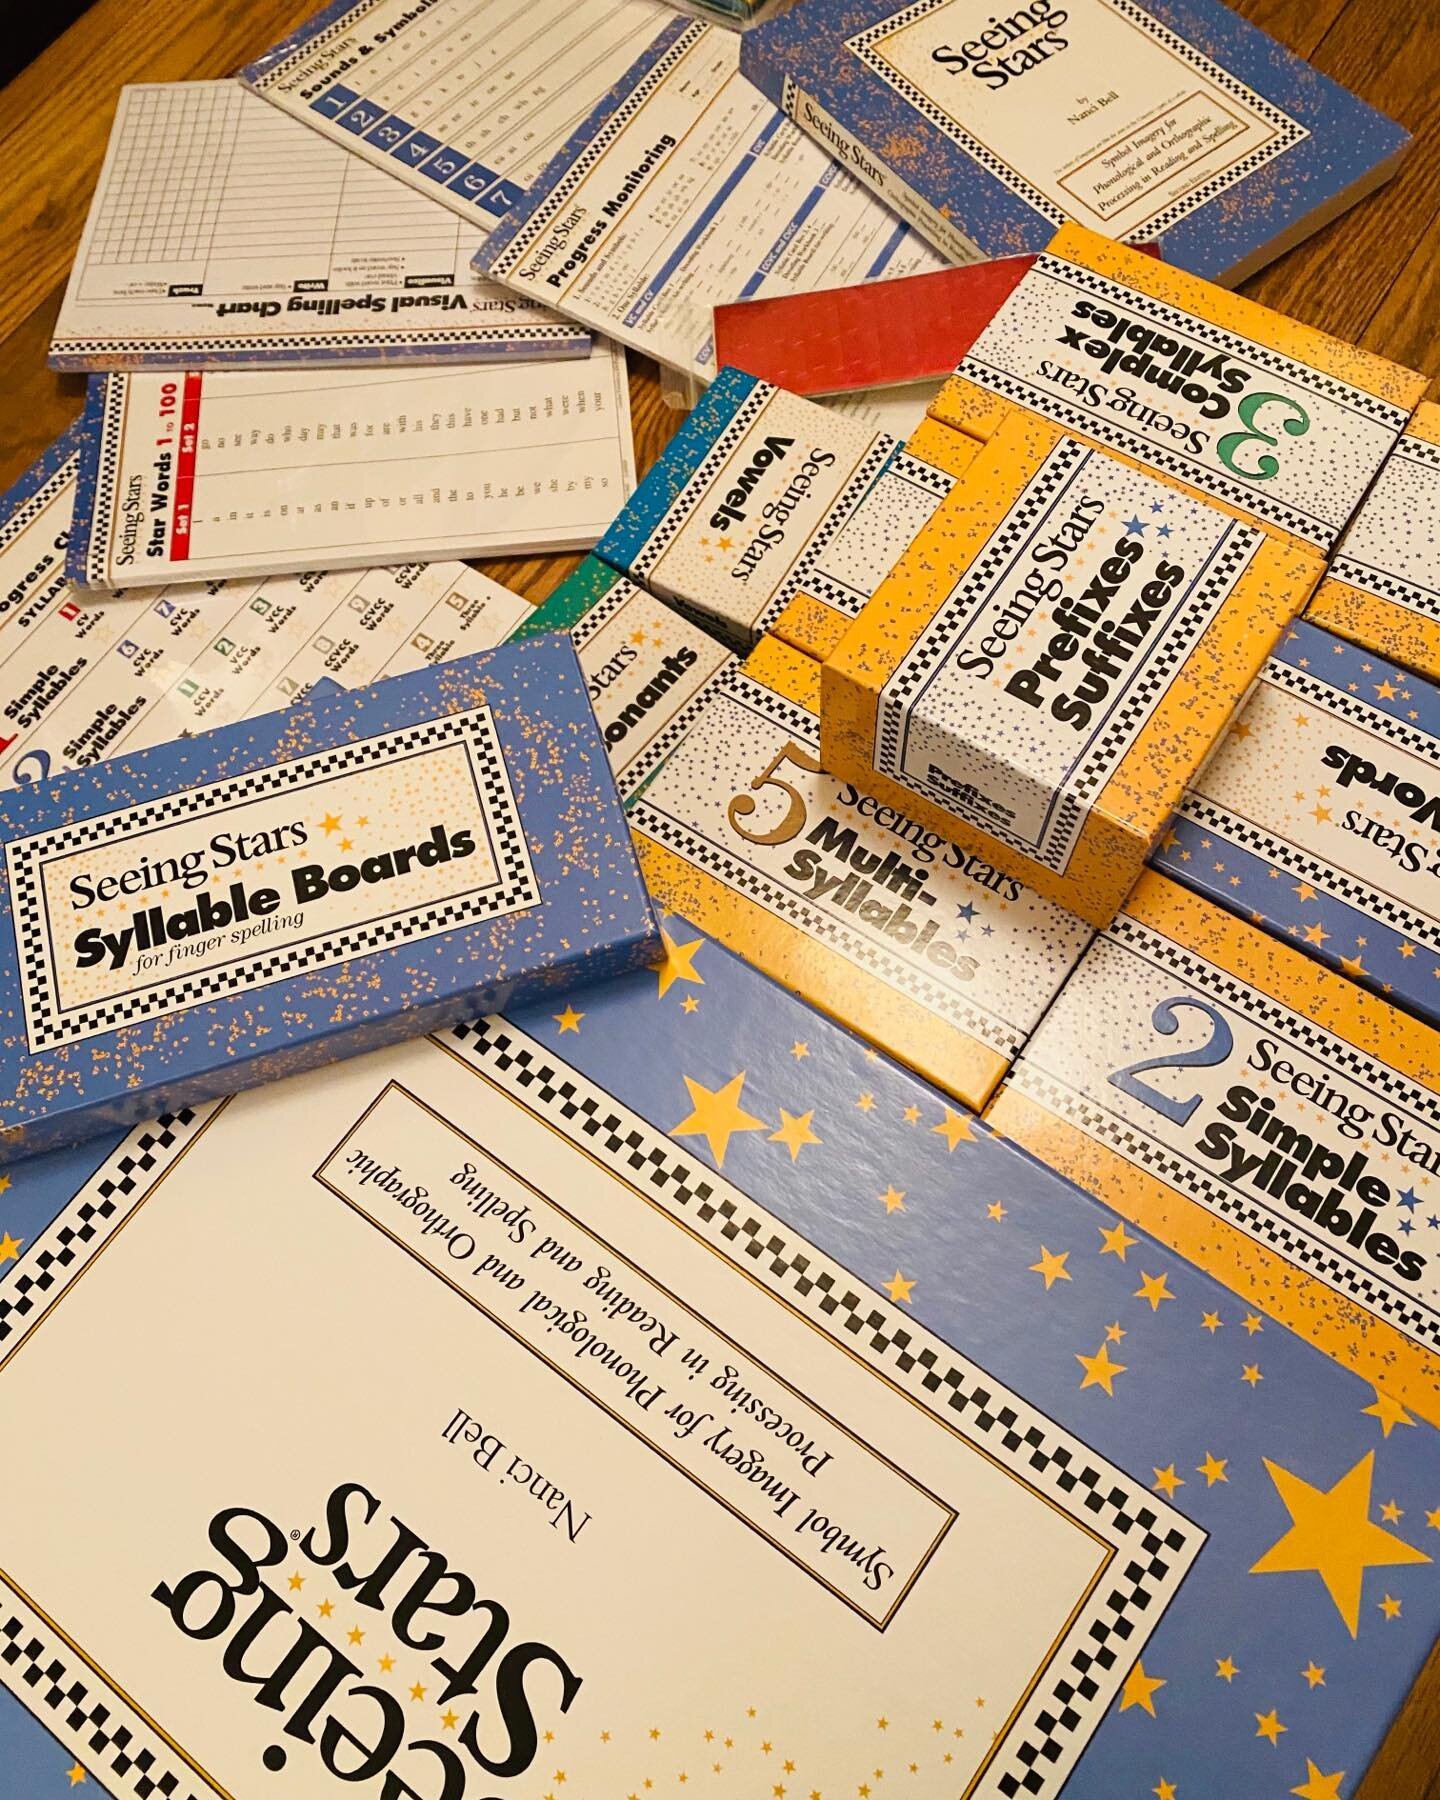 Here at ProjecTAMA, one of the programs we utilize to cultivate and develop strong readers is Seeing Stars. The program focuses on three sensory cognitive functions to develop automaticity in language and literacy skills. They are phonemic awareness,